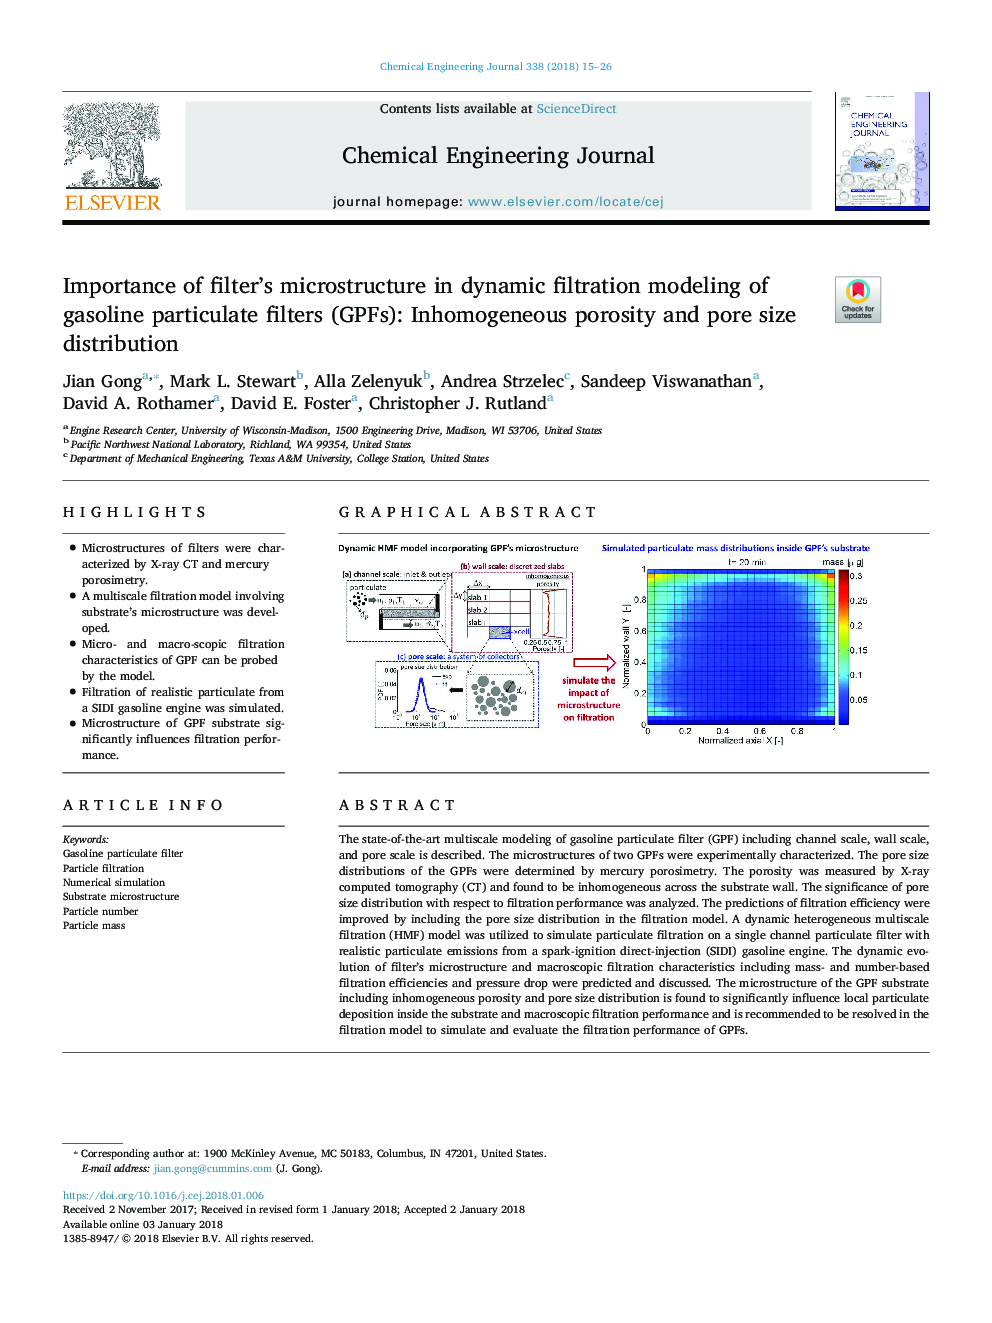 Importance of filter's microstructure in dynamic filtration modeling of gasoline particulate filters (GPFs): Inhomogeneous porosity and pore size distribution